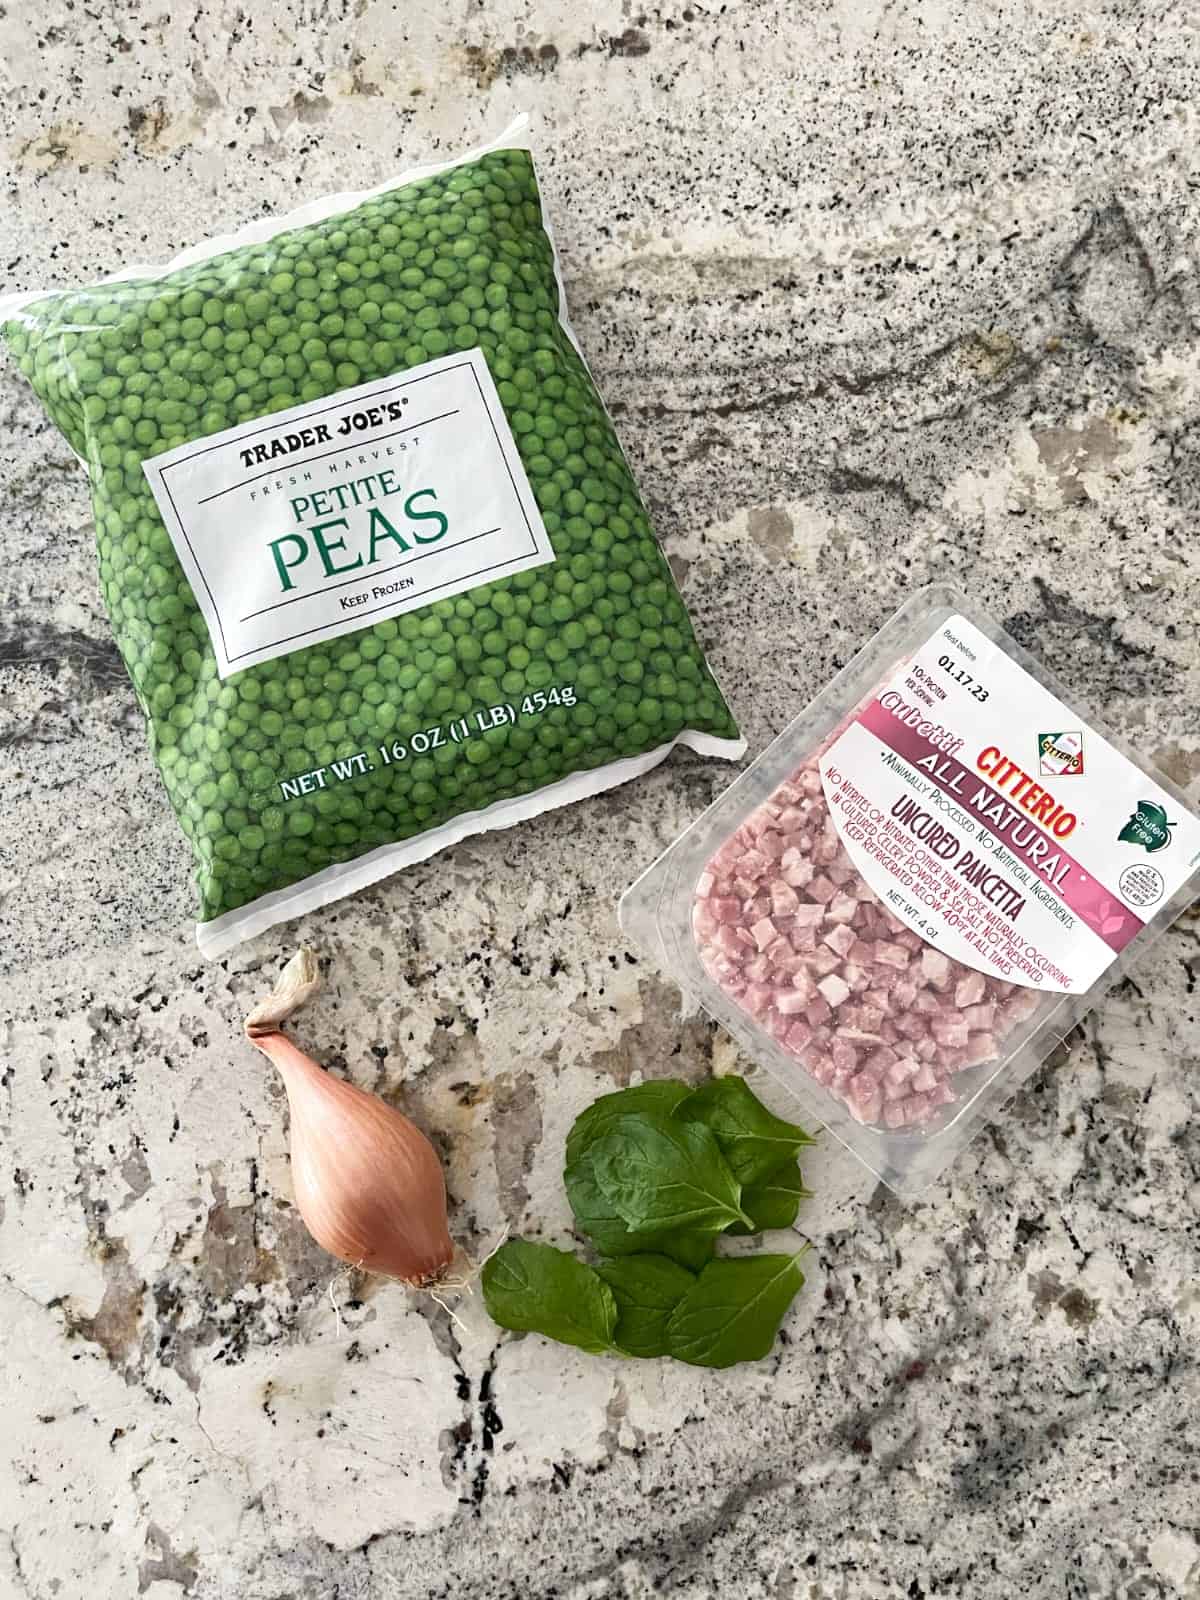 Bag of frozen peas, package of uncured pancetta, whole shallot and fresh mint leaves on granite.